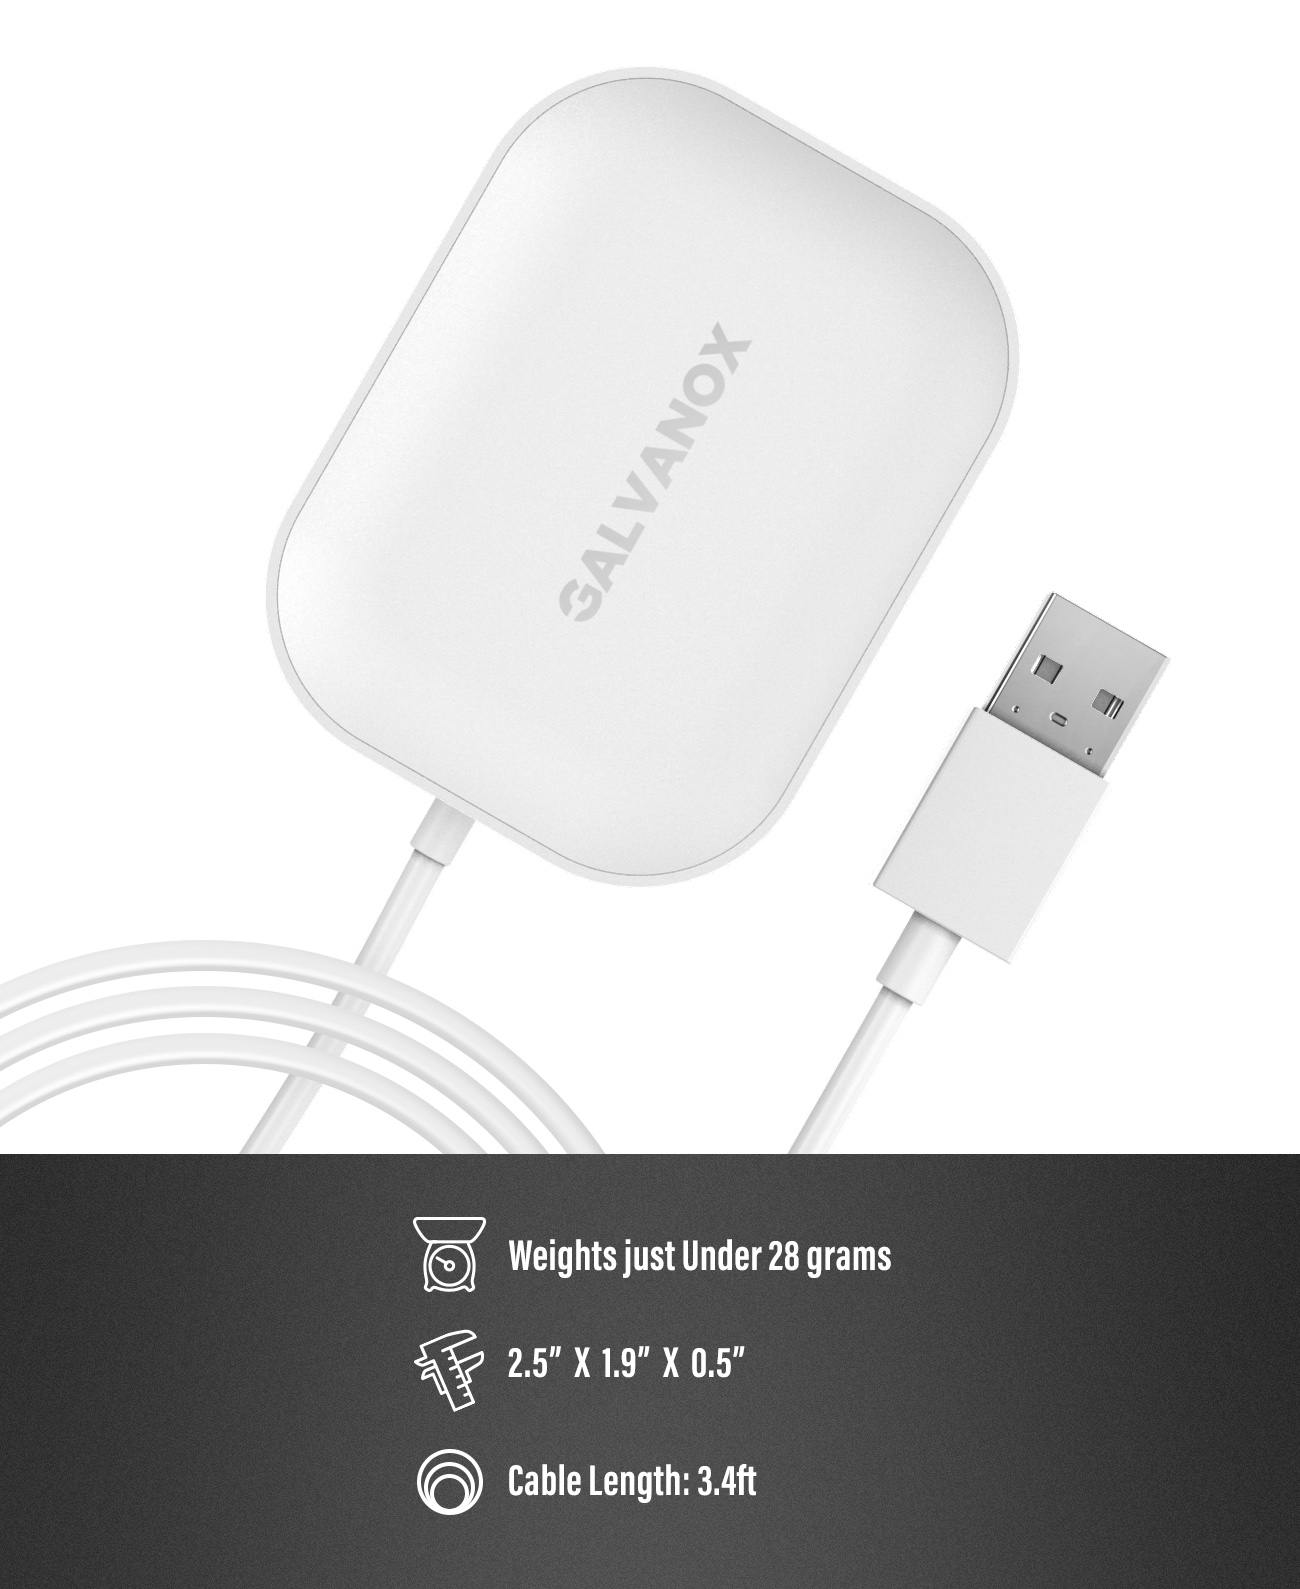 Galvanox AirPods Pro Charger White Wireless Charging Station for Apple AirPod Pro 